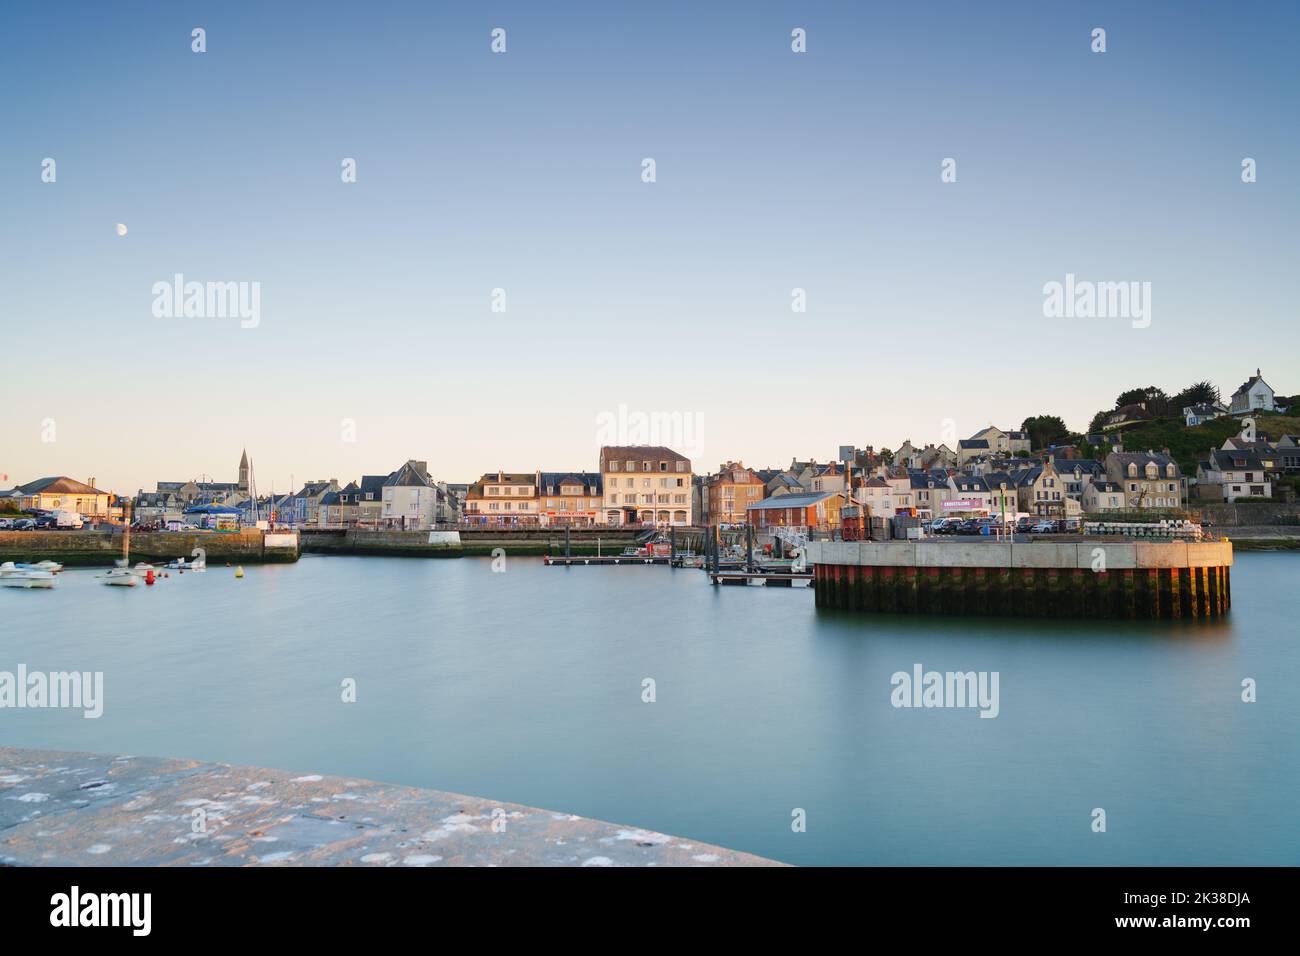 The fishing town of Port-en-Bessin, as seen from the sea wall looking across the harbour. Stock Photo